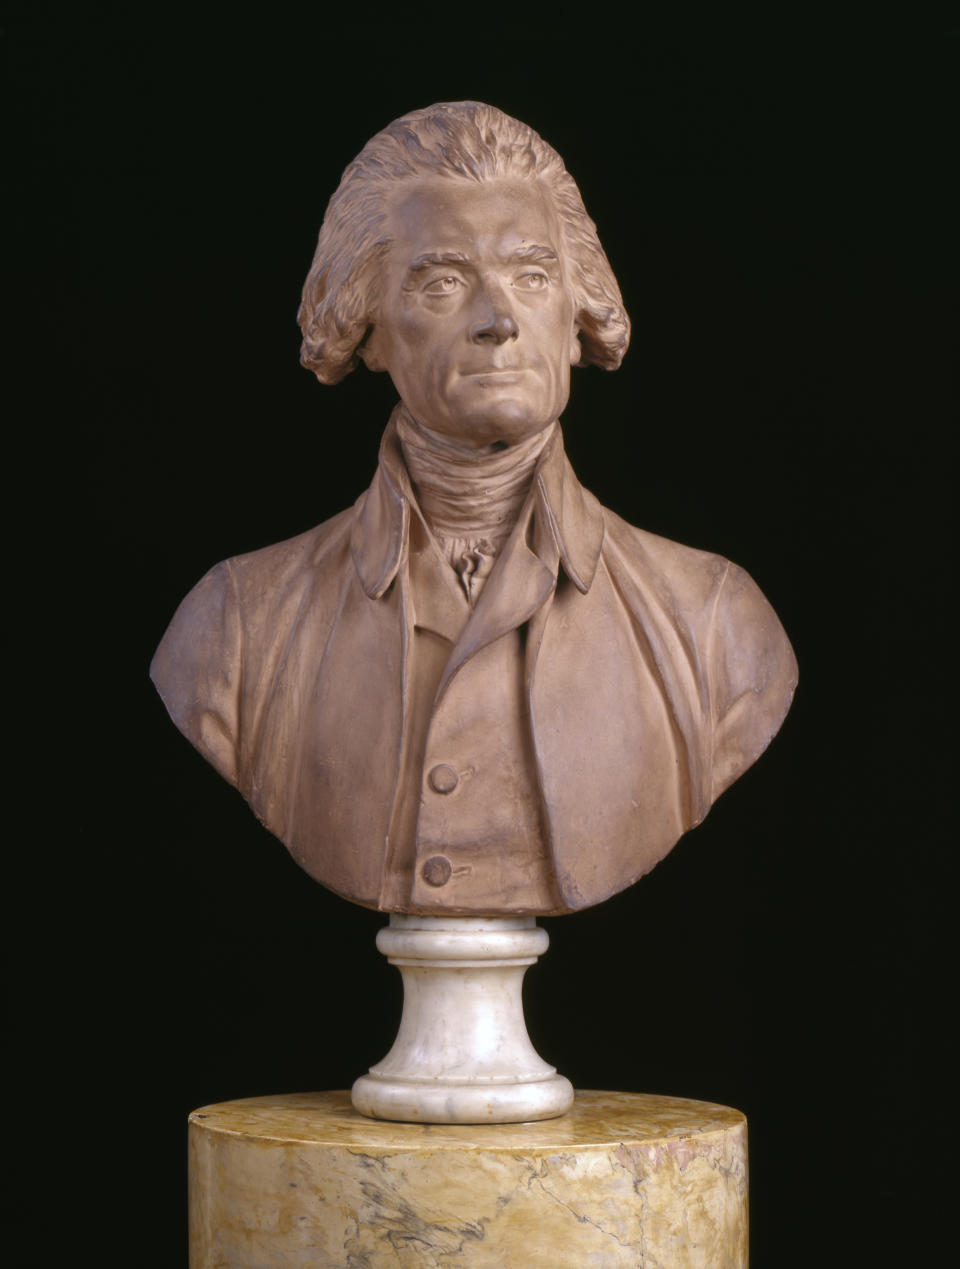 This undated file photo provided by the Thomas Jefferson Foundation at Monticello shows the 1789 bust of Thomas Jefferson, by Jean Antoine Houdon. Jefferson's Monticello will offer many remembrances of his years in France when President Francois Hollande and President Barack Obama visit Monticello on Monday, Feb. 10. (AP Photo/Thomas Jefferson Foundation at Monticello, Edward Owen)